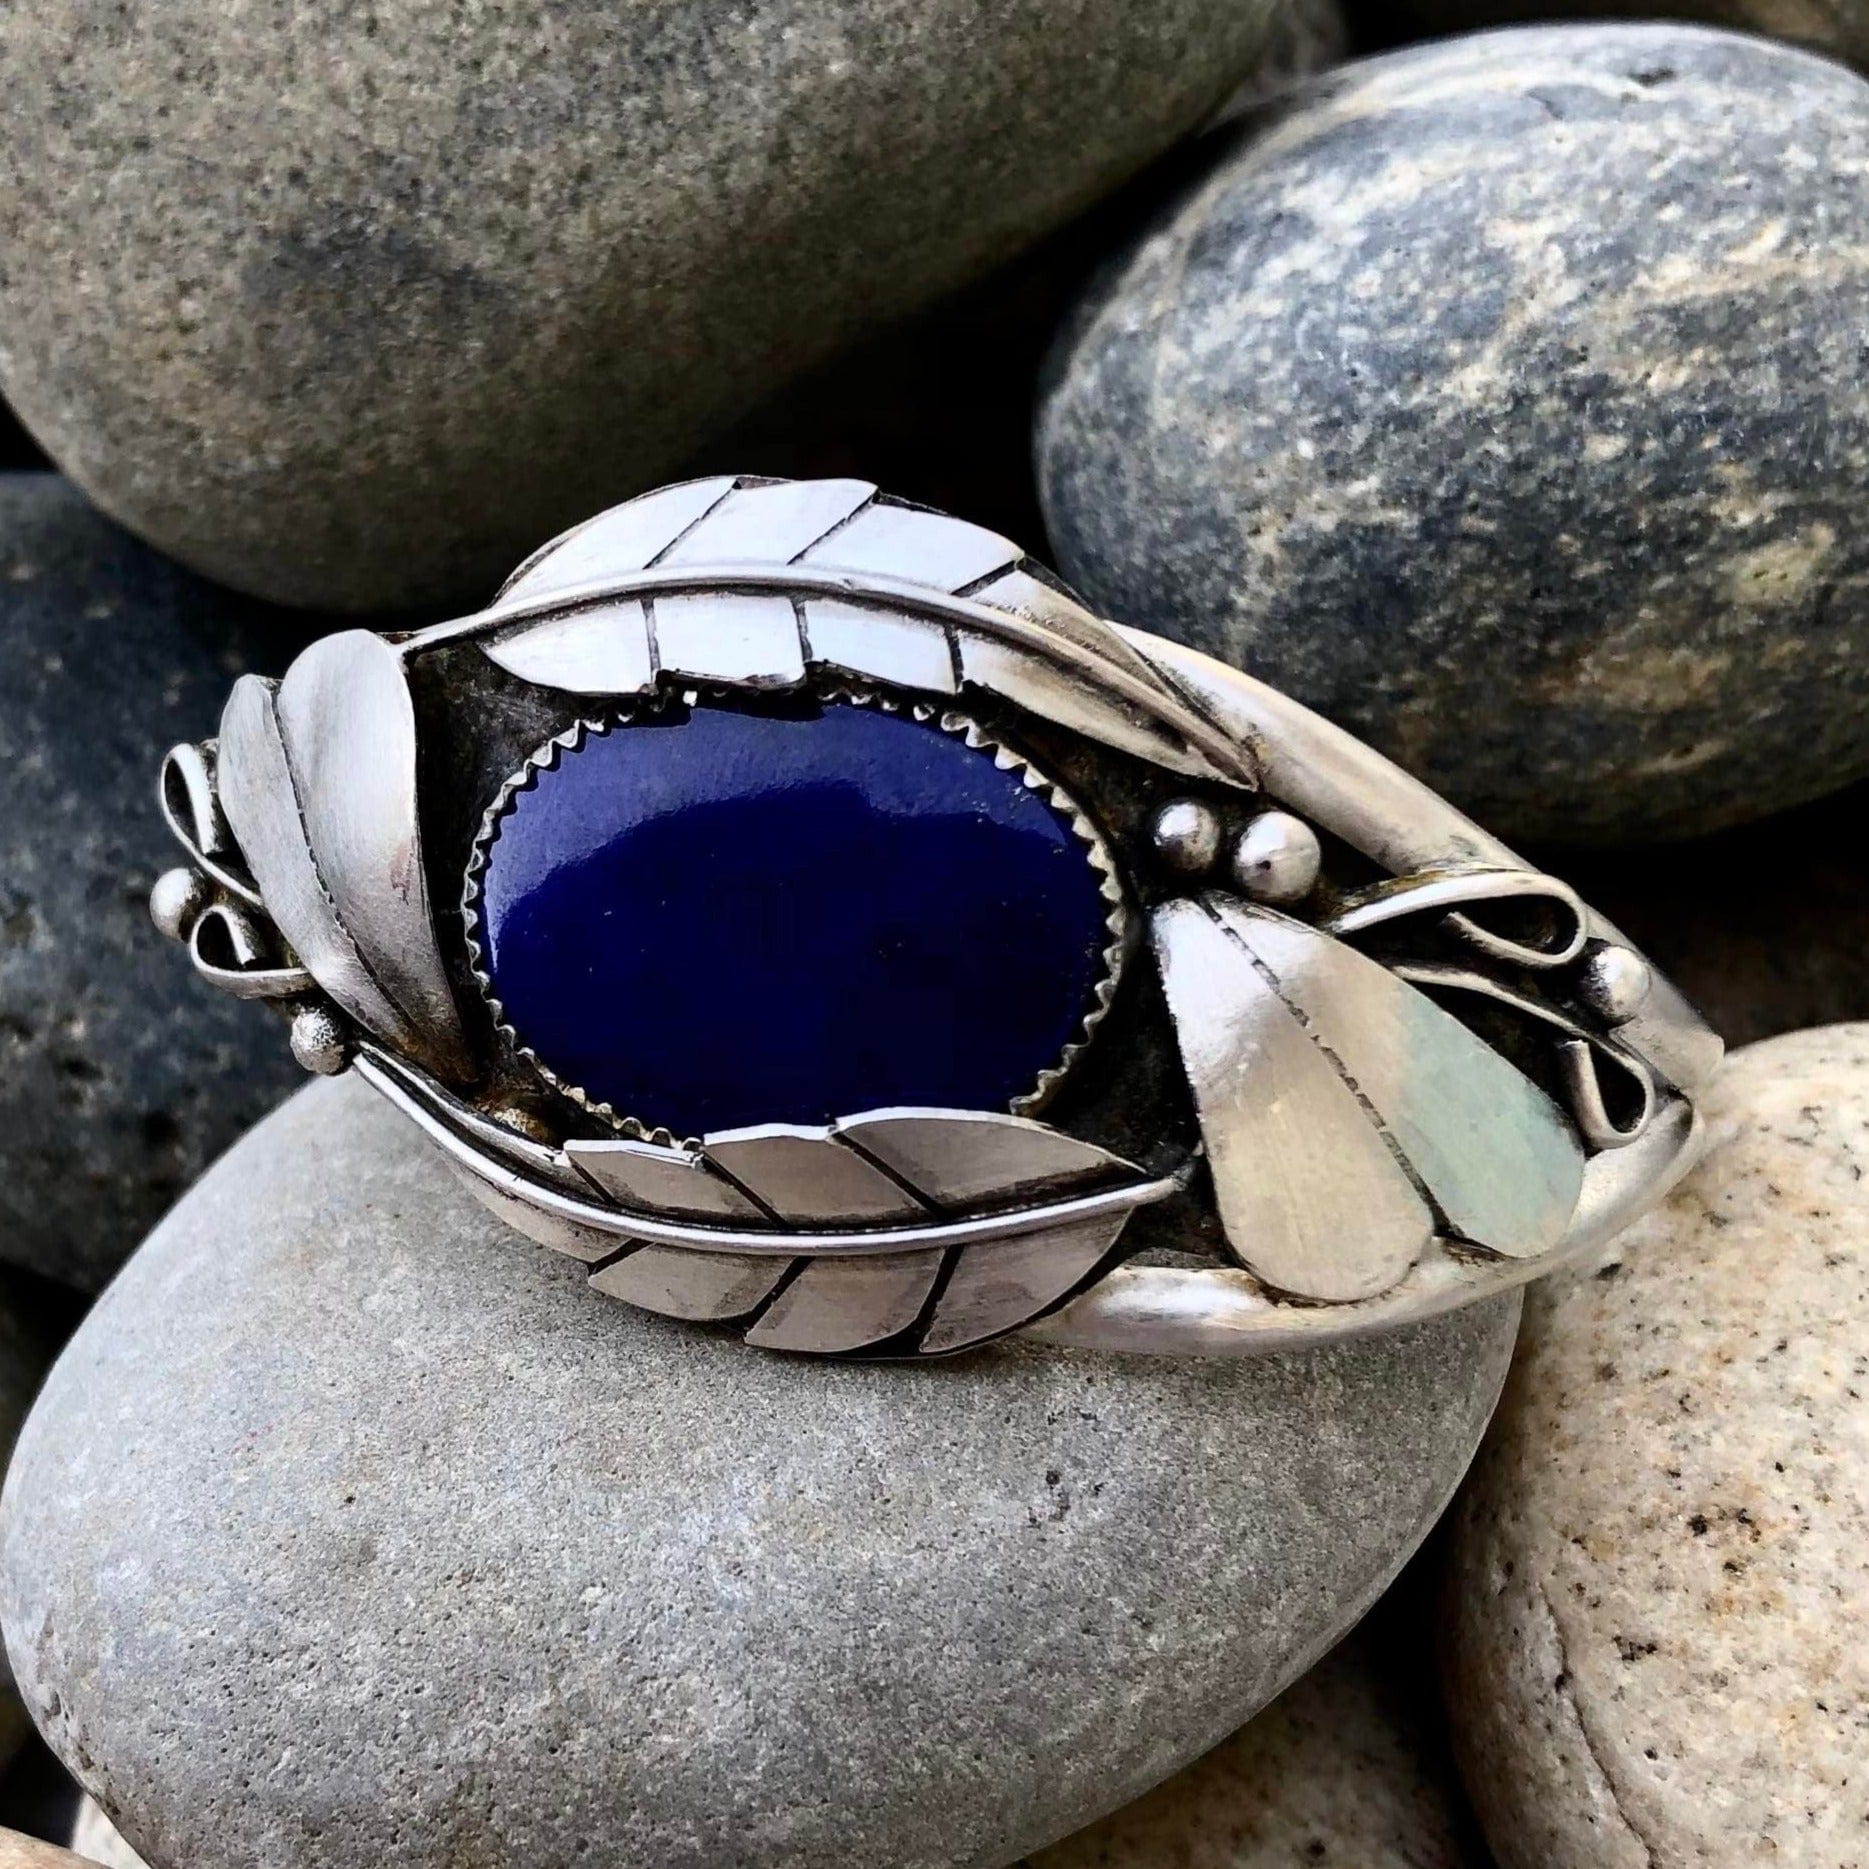 Summer Joy Silver Bracelet Sterling Silver and Lapis Statement Cuff